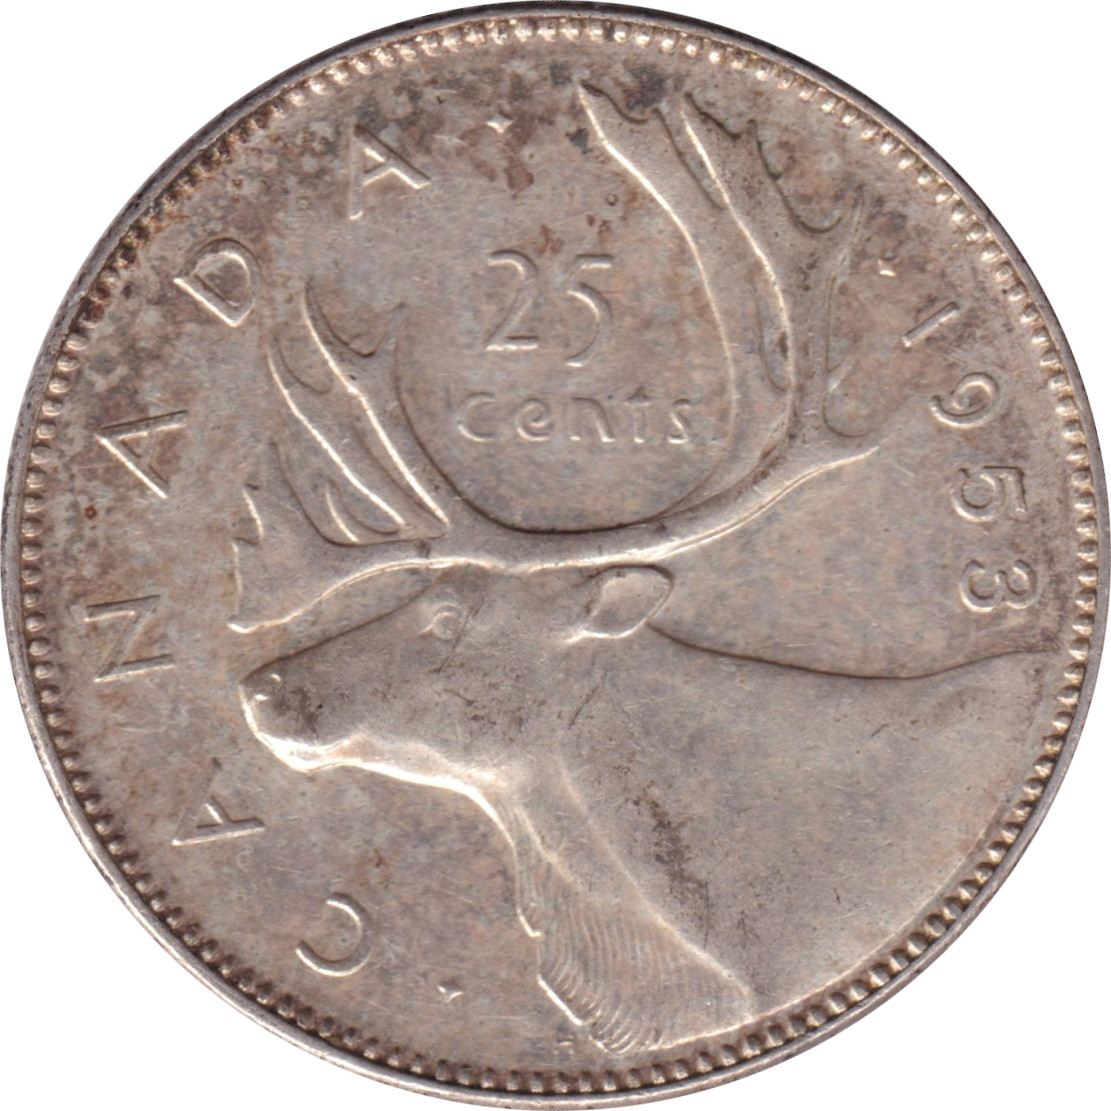 25 cents - Elizabeth II - Young bust